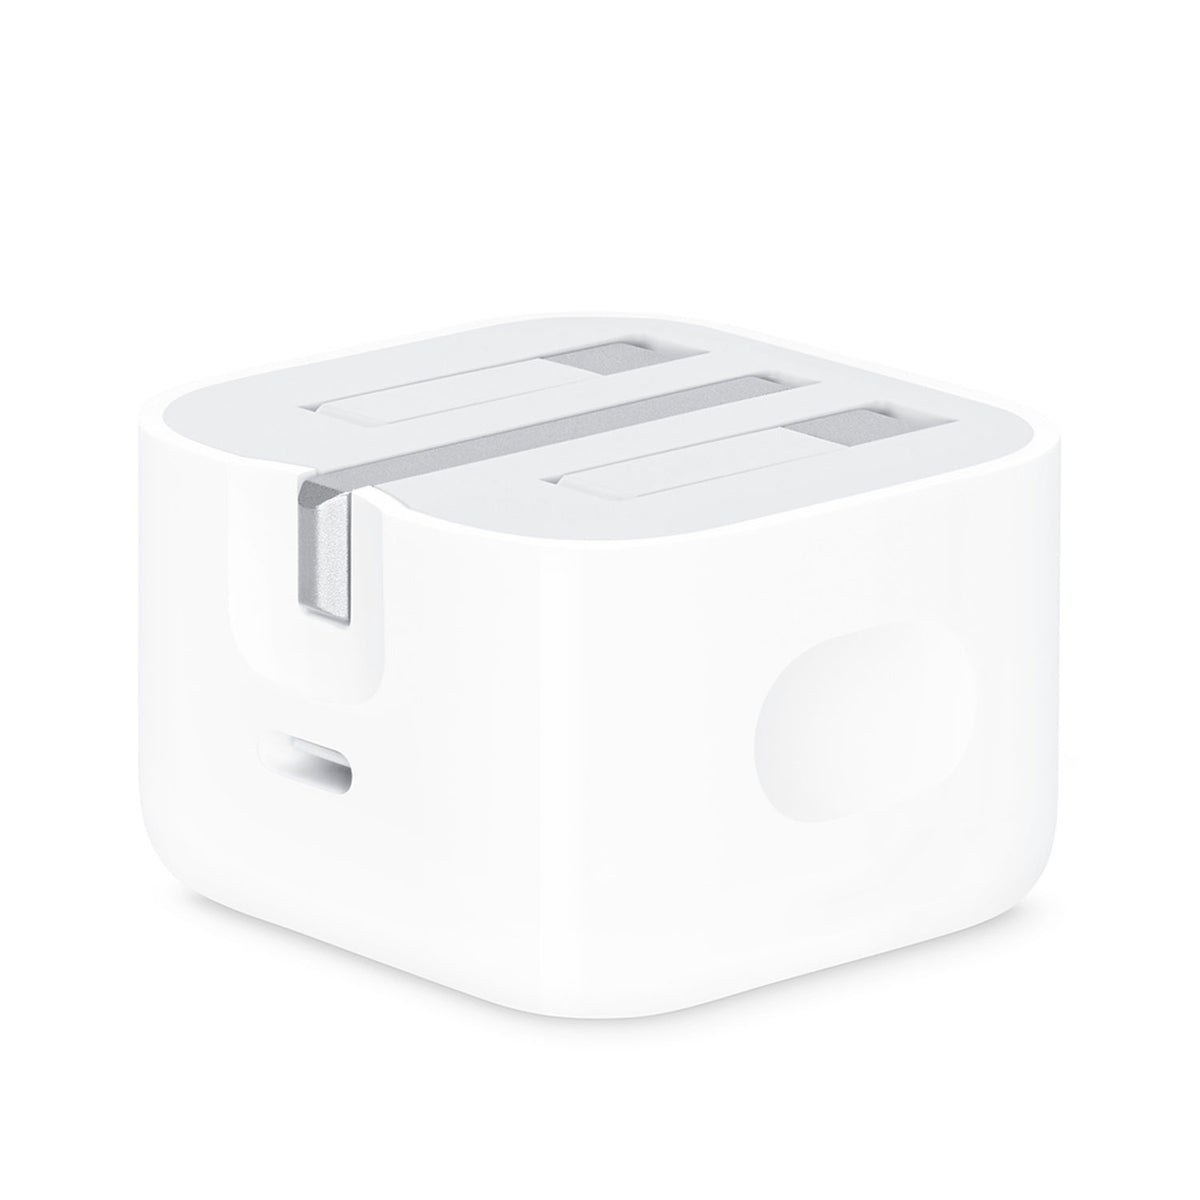 20W USB-C POWER ADAPTER FOR IPHONE- UK VERSION